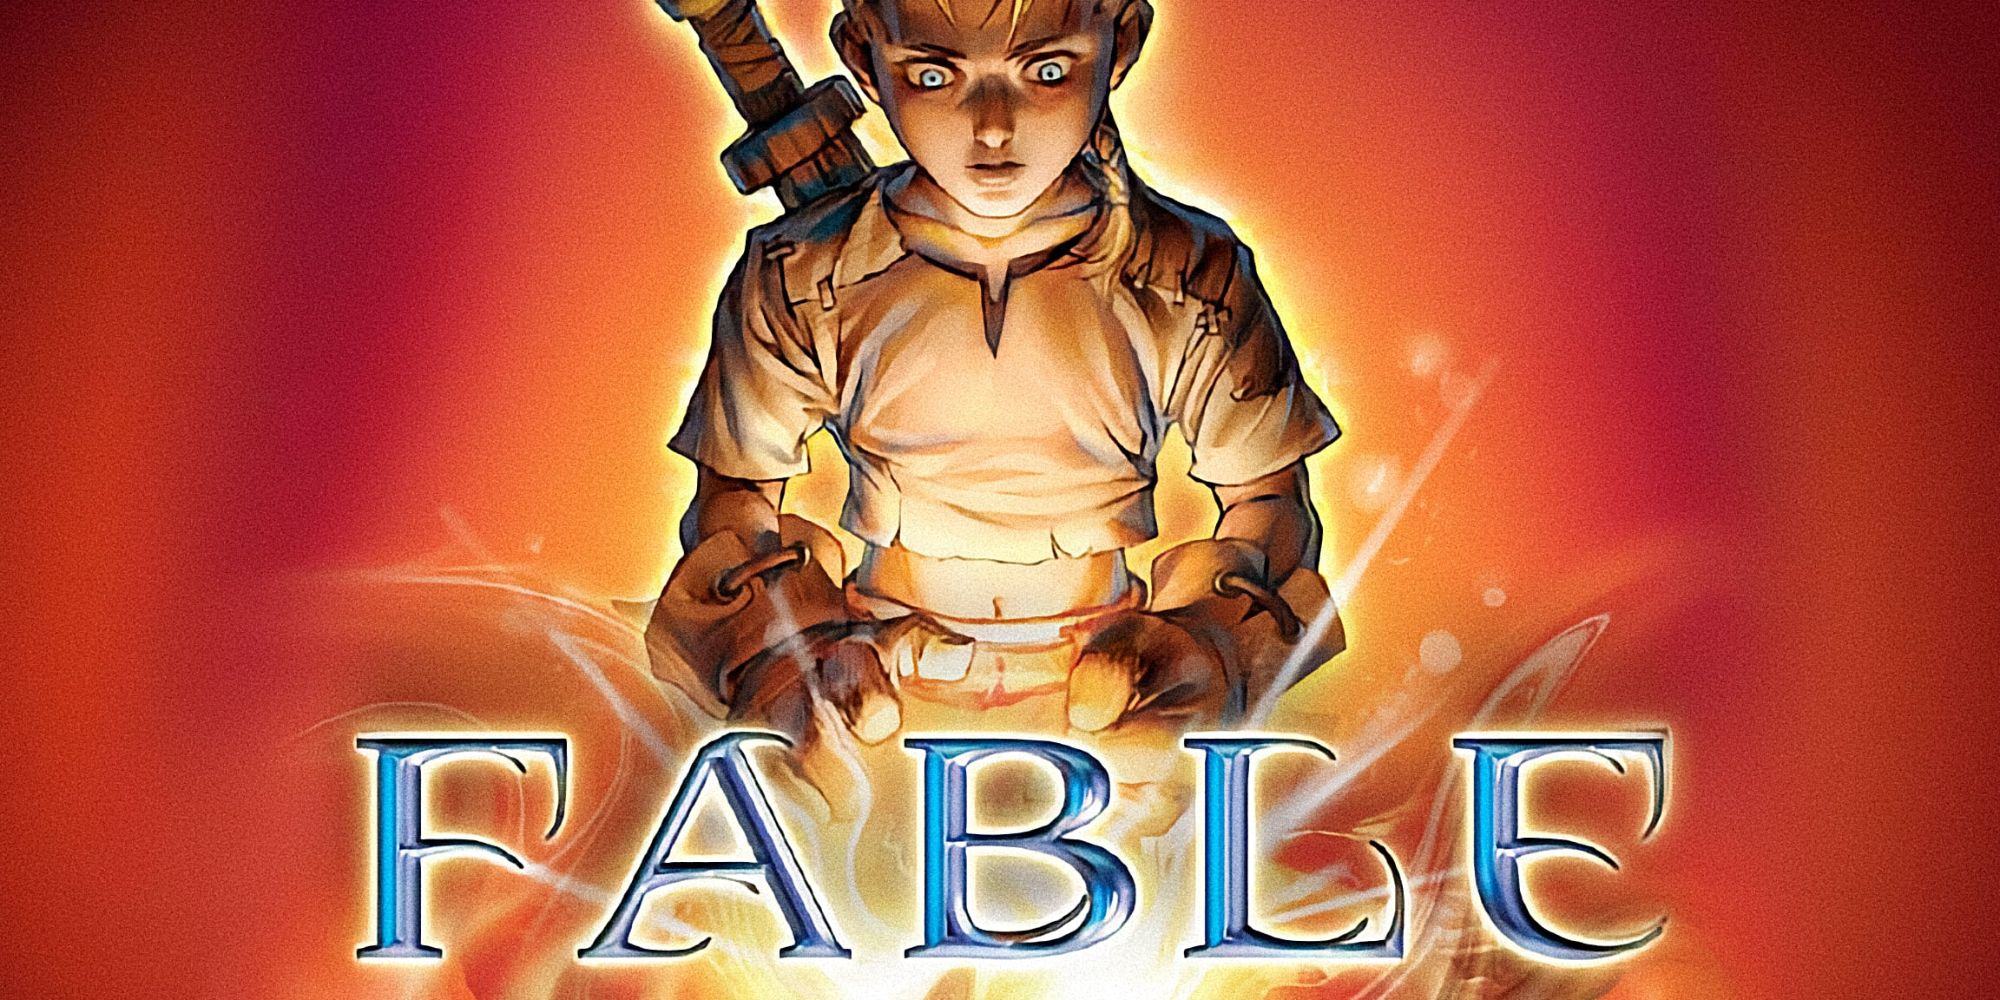 Box shape for the first Fable game, showing the young protagonist looking down at the title figure with a magical light behind it.